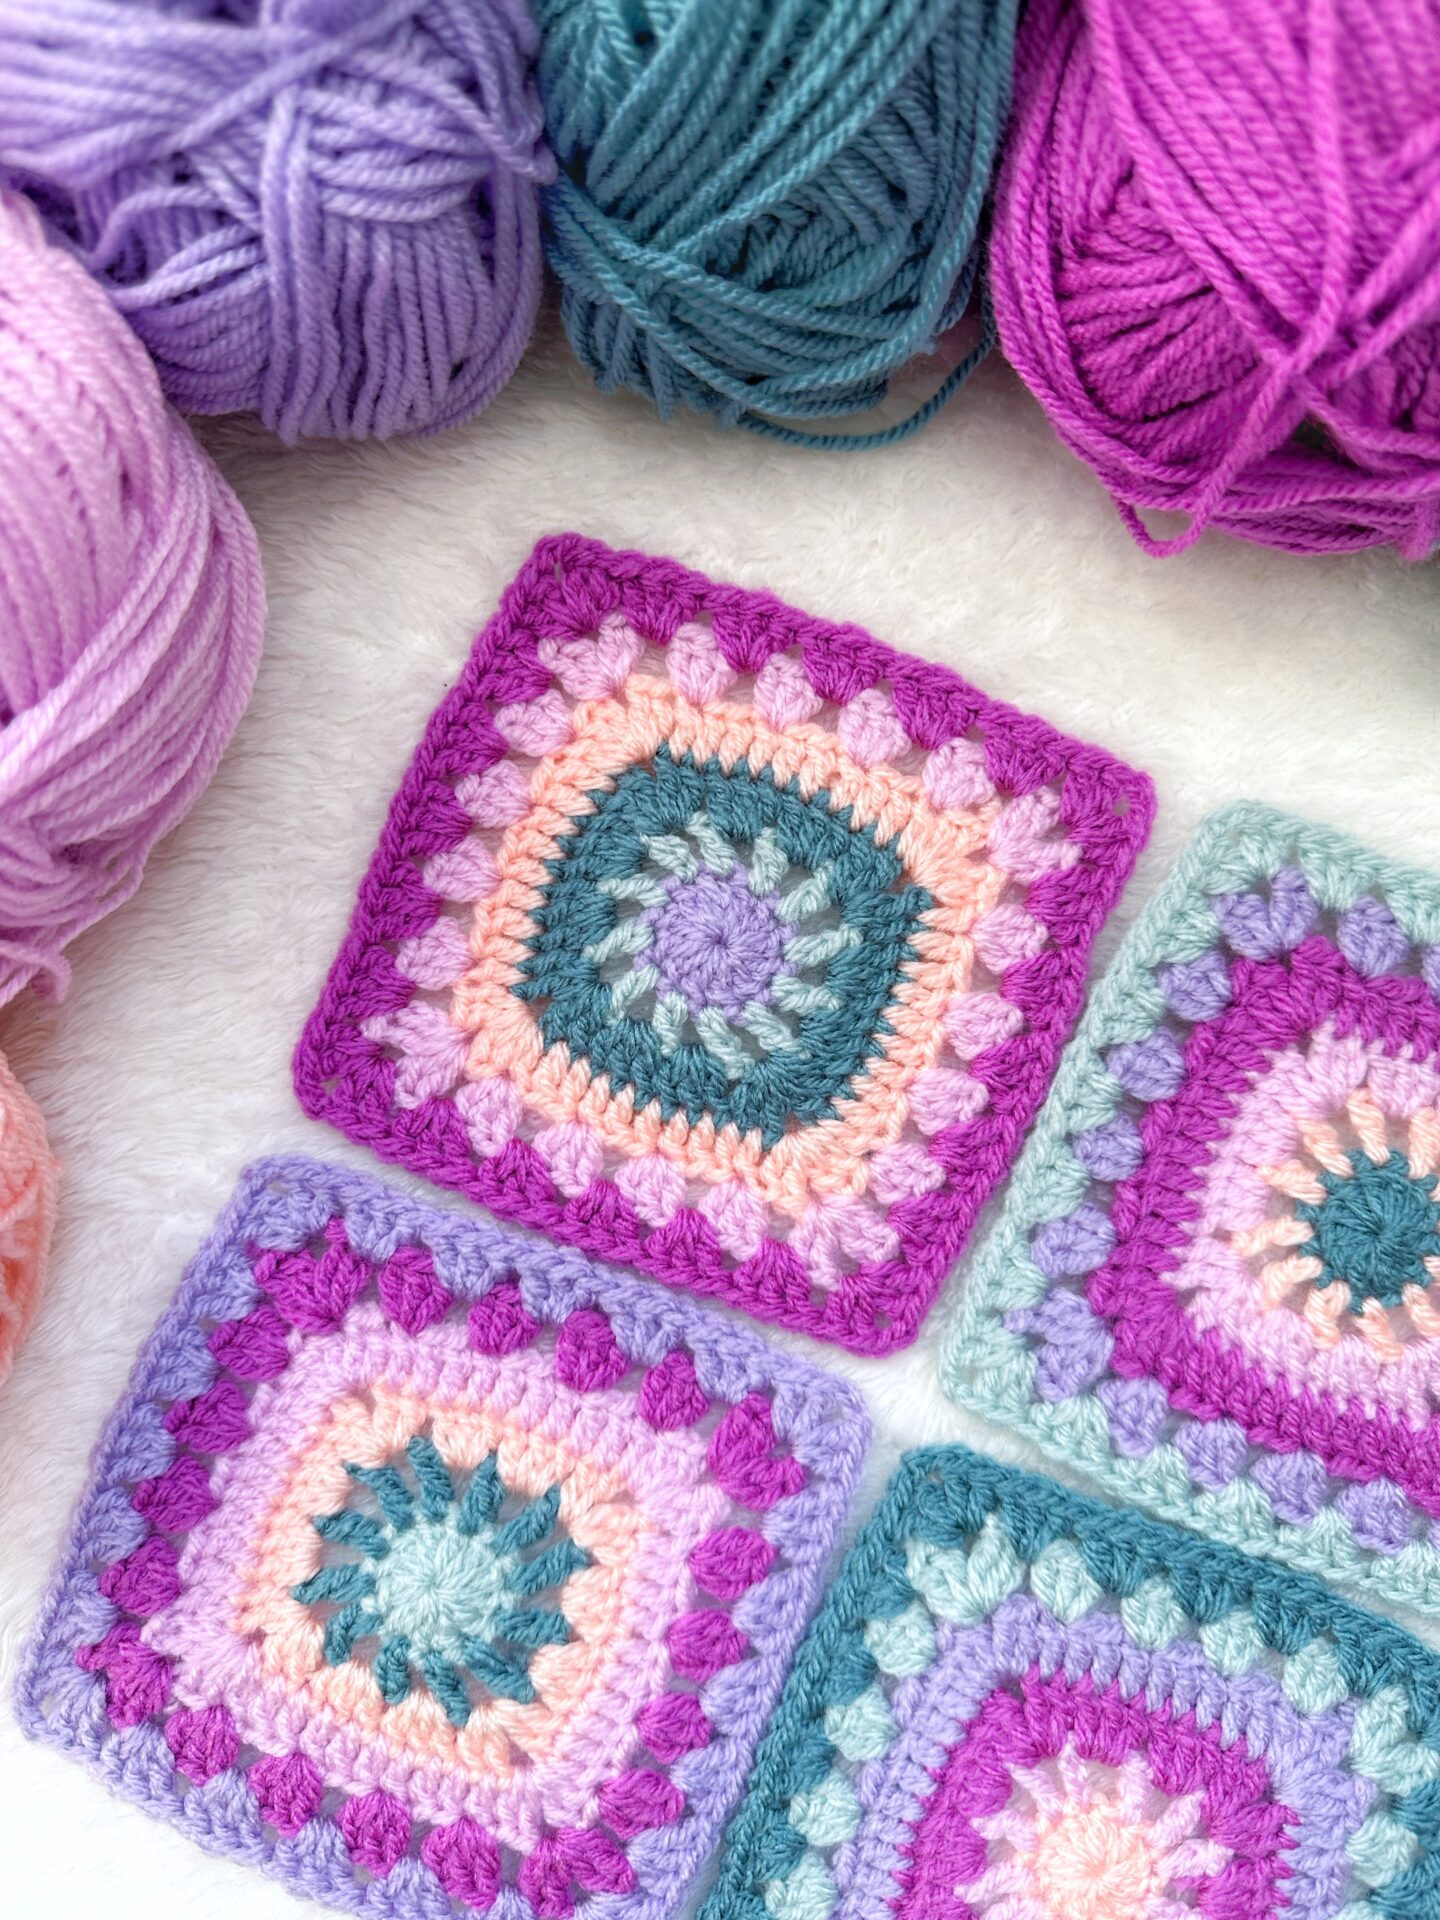 How to Crochet a Granny Square for Beginners - Sarah Maker